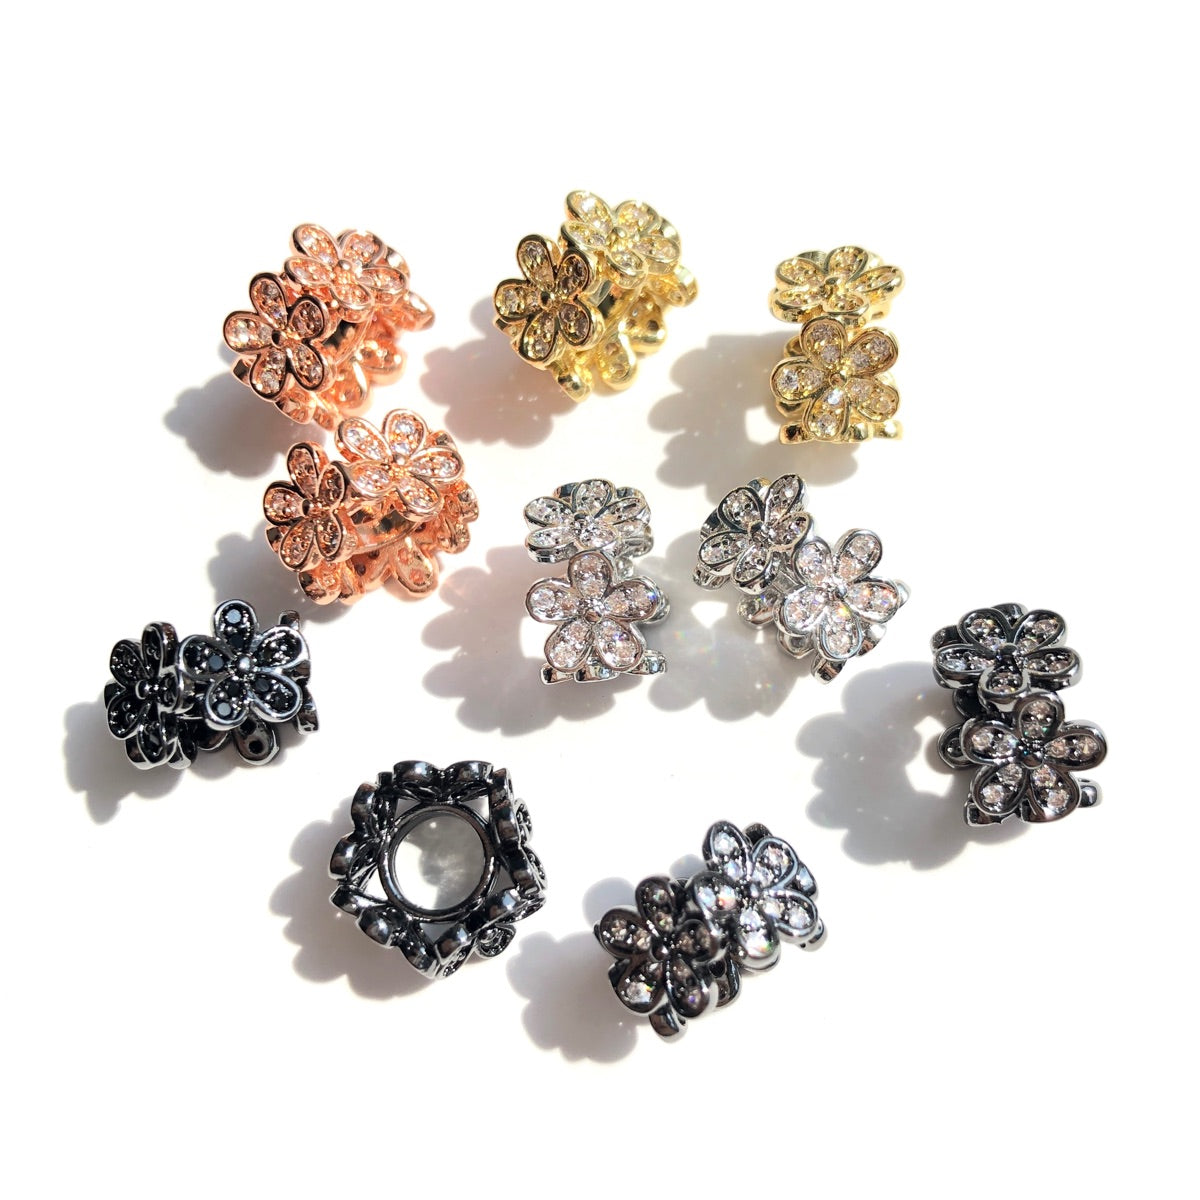 10-20-50pcs/lot 10.6*6.8mm CZ Paved Flower Spacers Mix Colors CZ Paved Spacers New Spacers Arrivals Wholesale Charms Beads Beyond